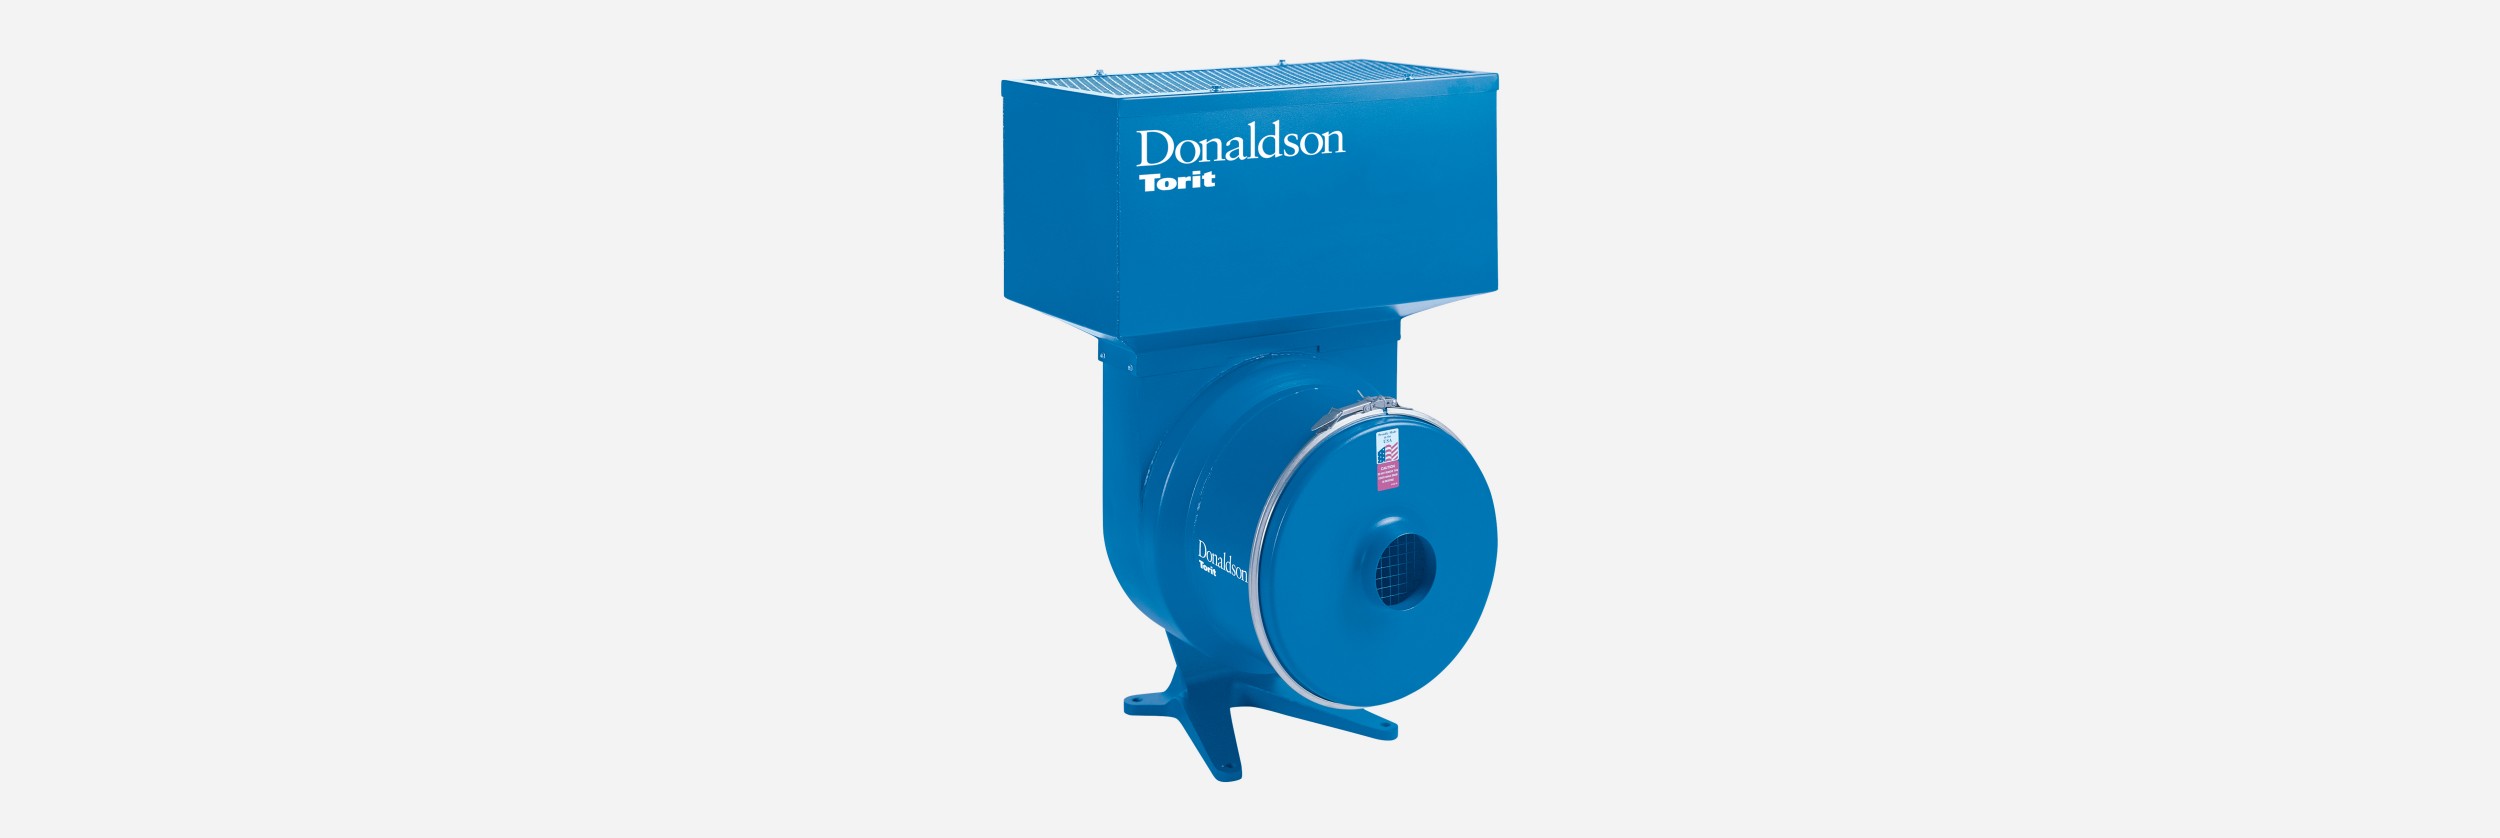 Donaldson Centrifugal Mist Collector hero image | AIRPLUS Industrial